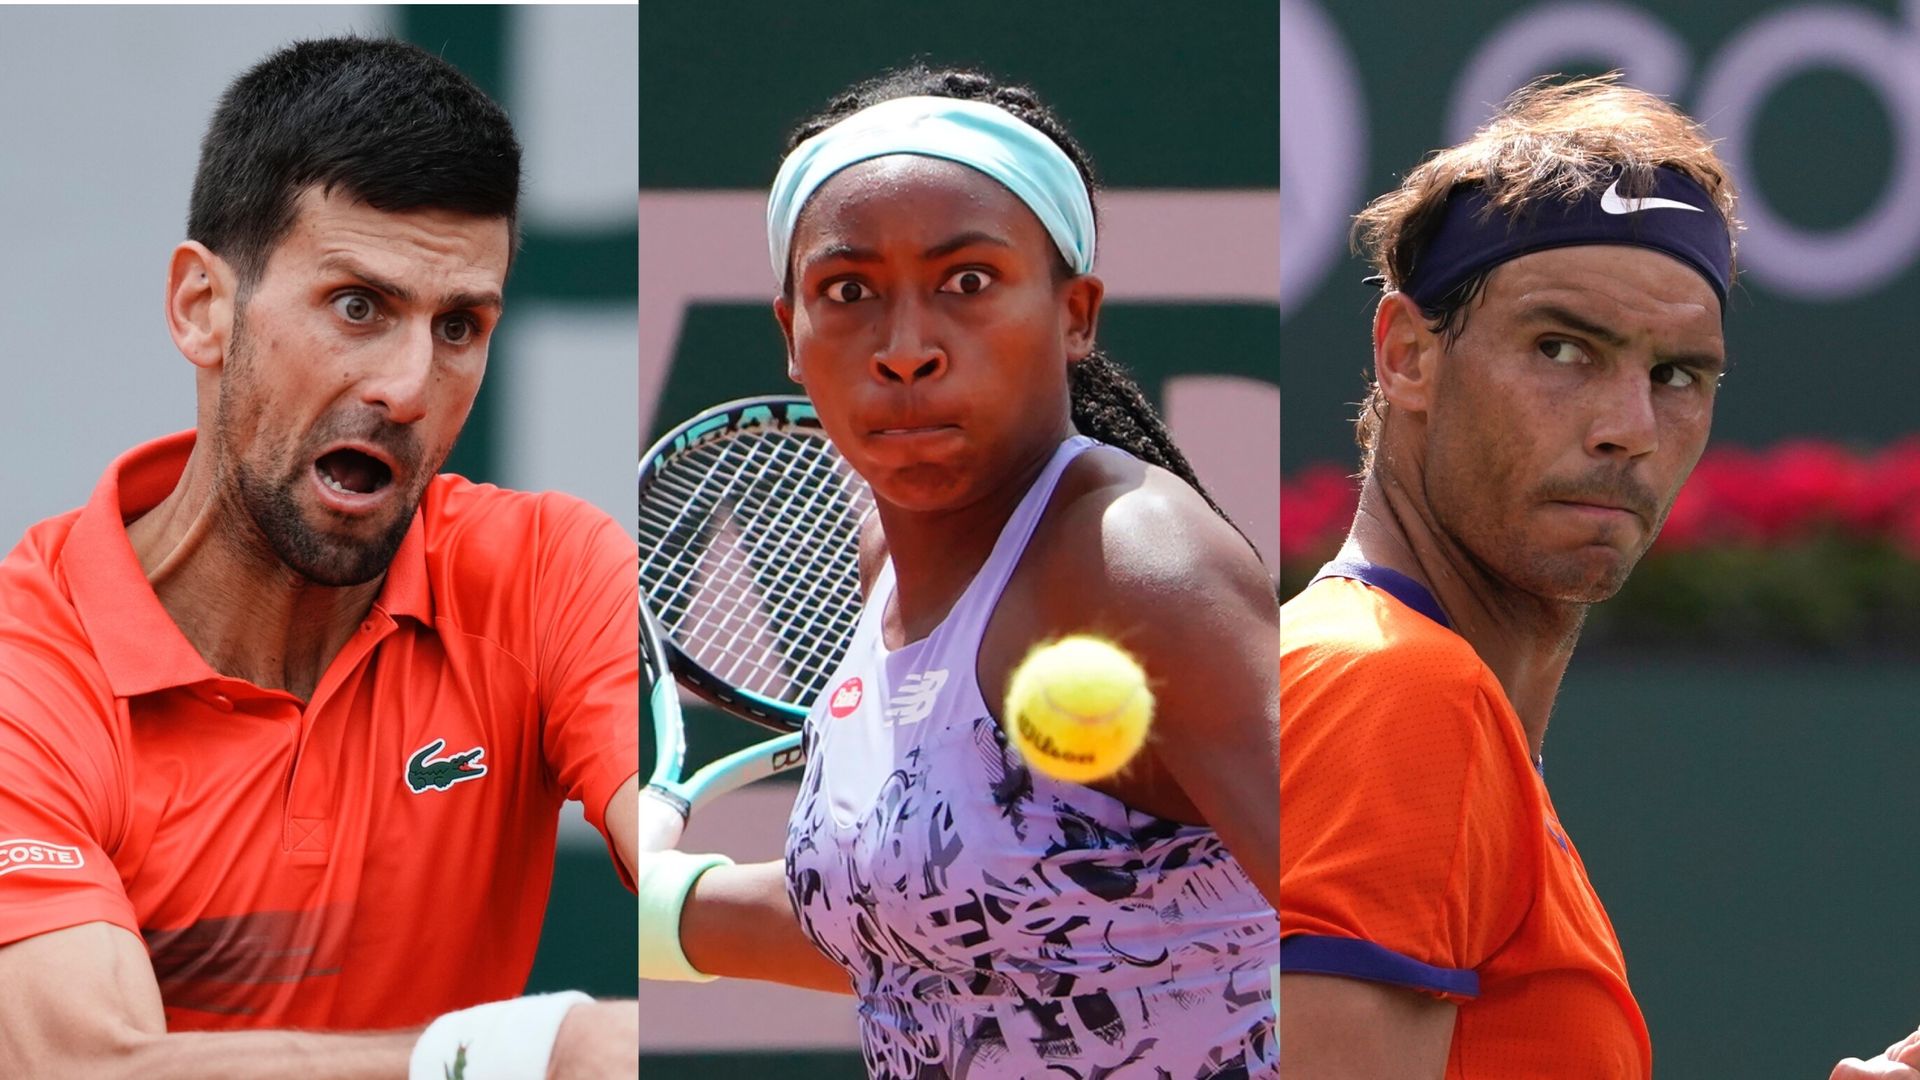 French Open - Latest scores from Roland Garros